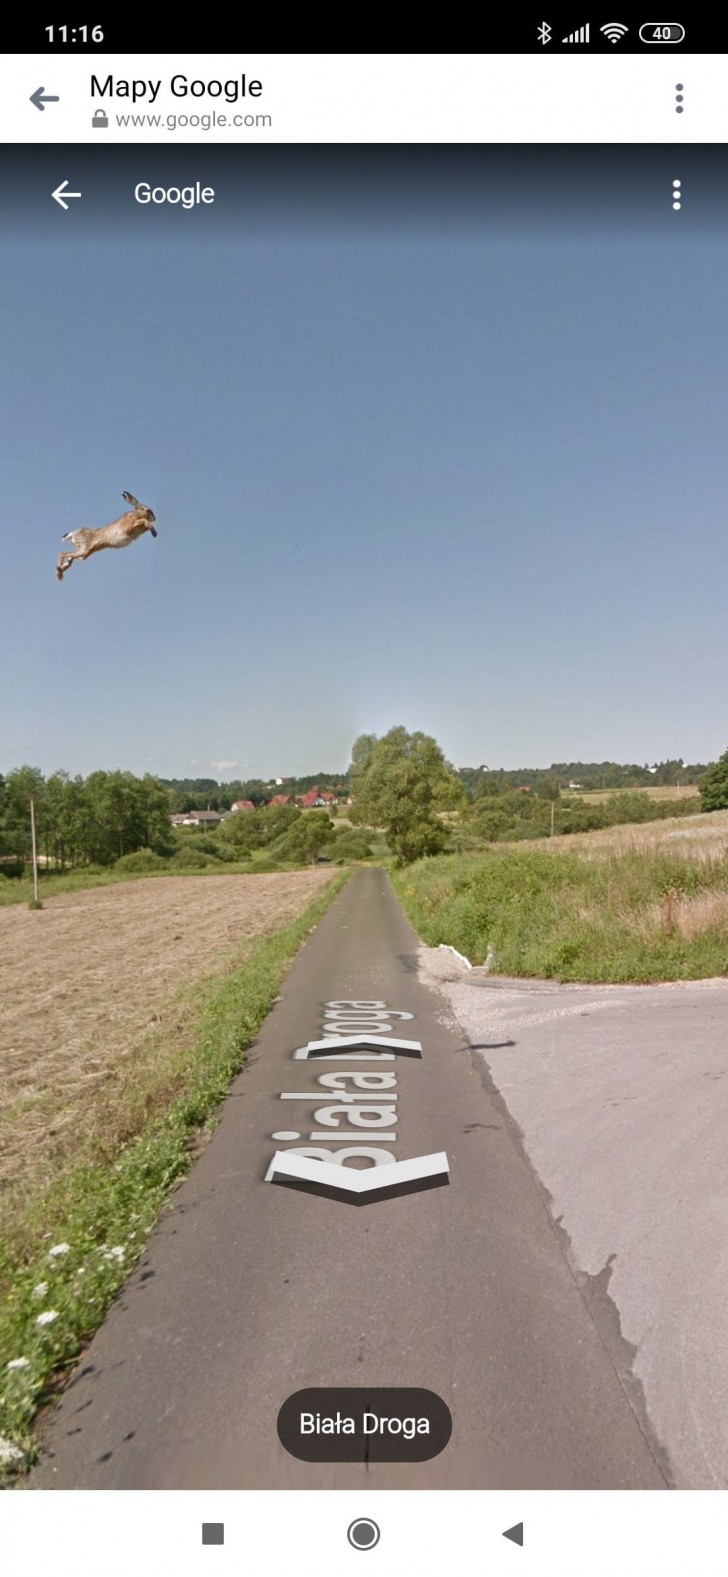 What were the chances of a hare being captured by a Google Street View screen?